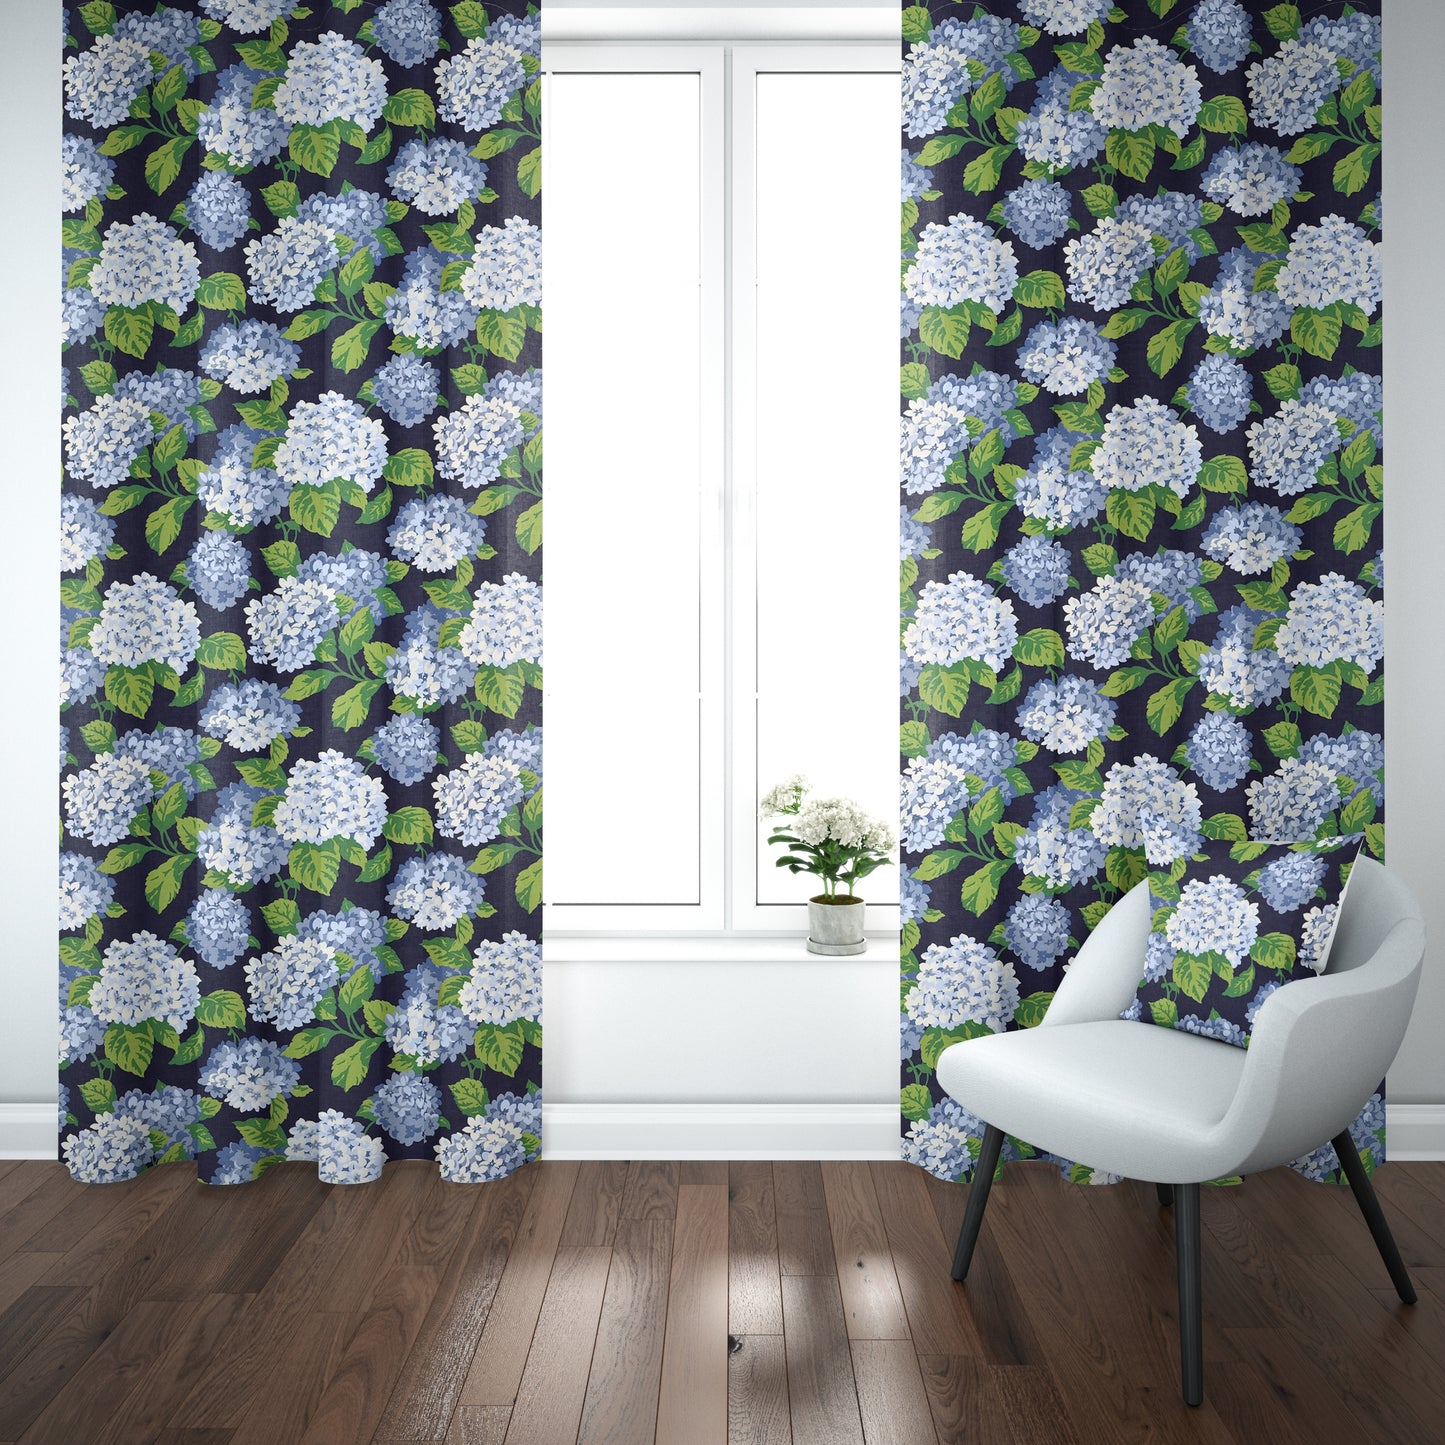 Pinch Pleated Curtains in Summerwind Navy Blue Hydrangea Floral, Large Scale